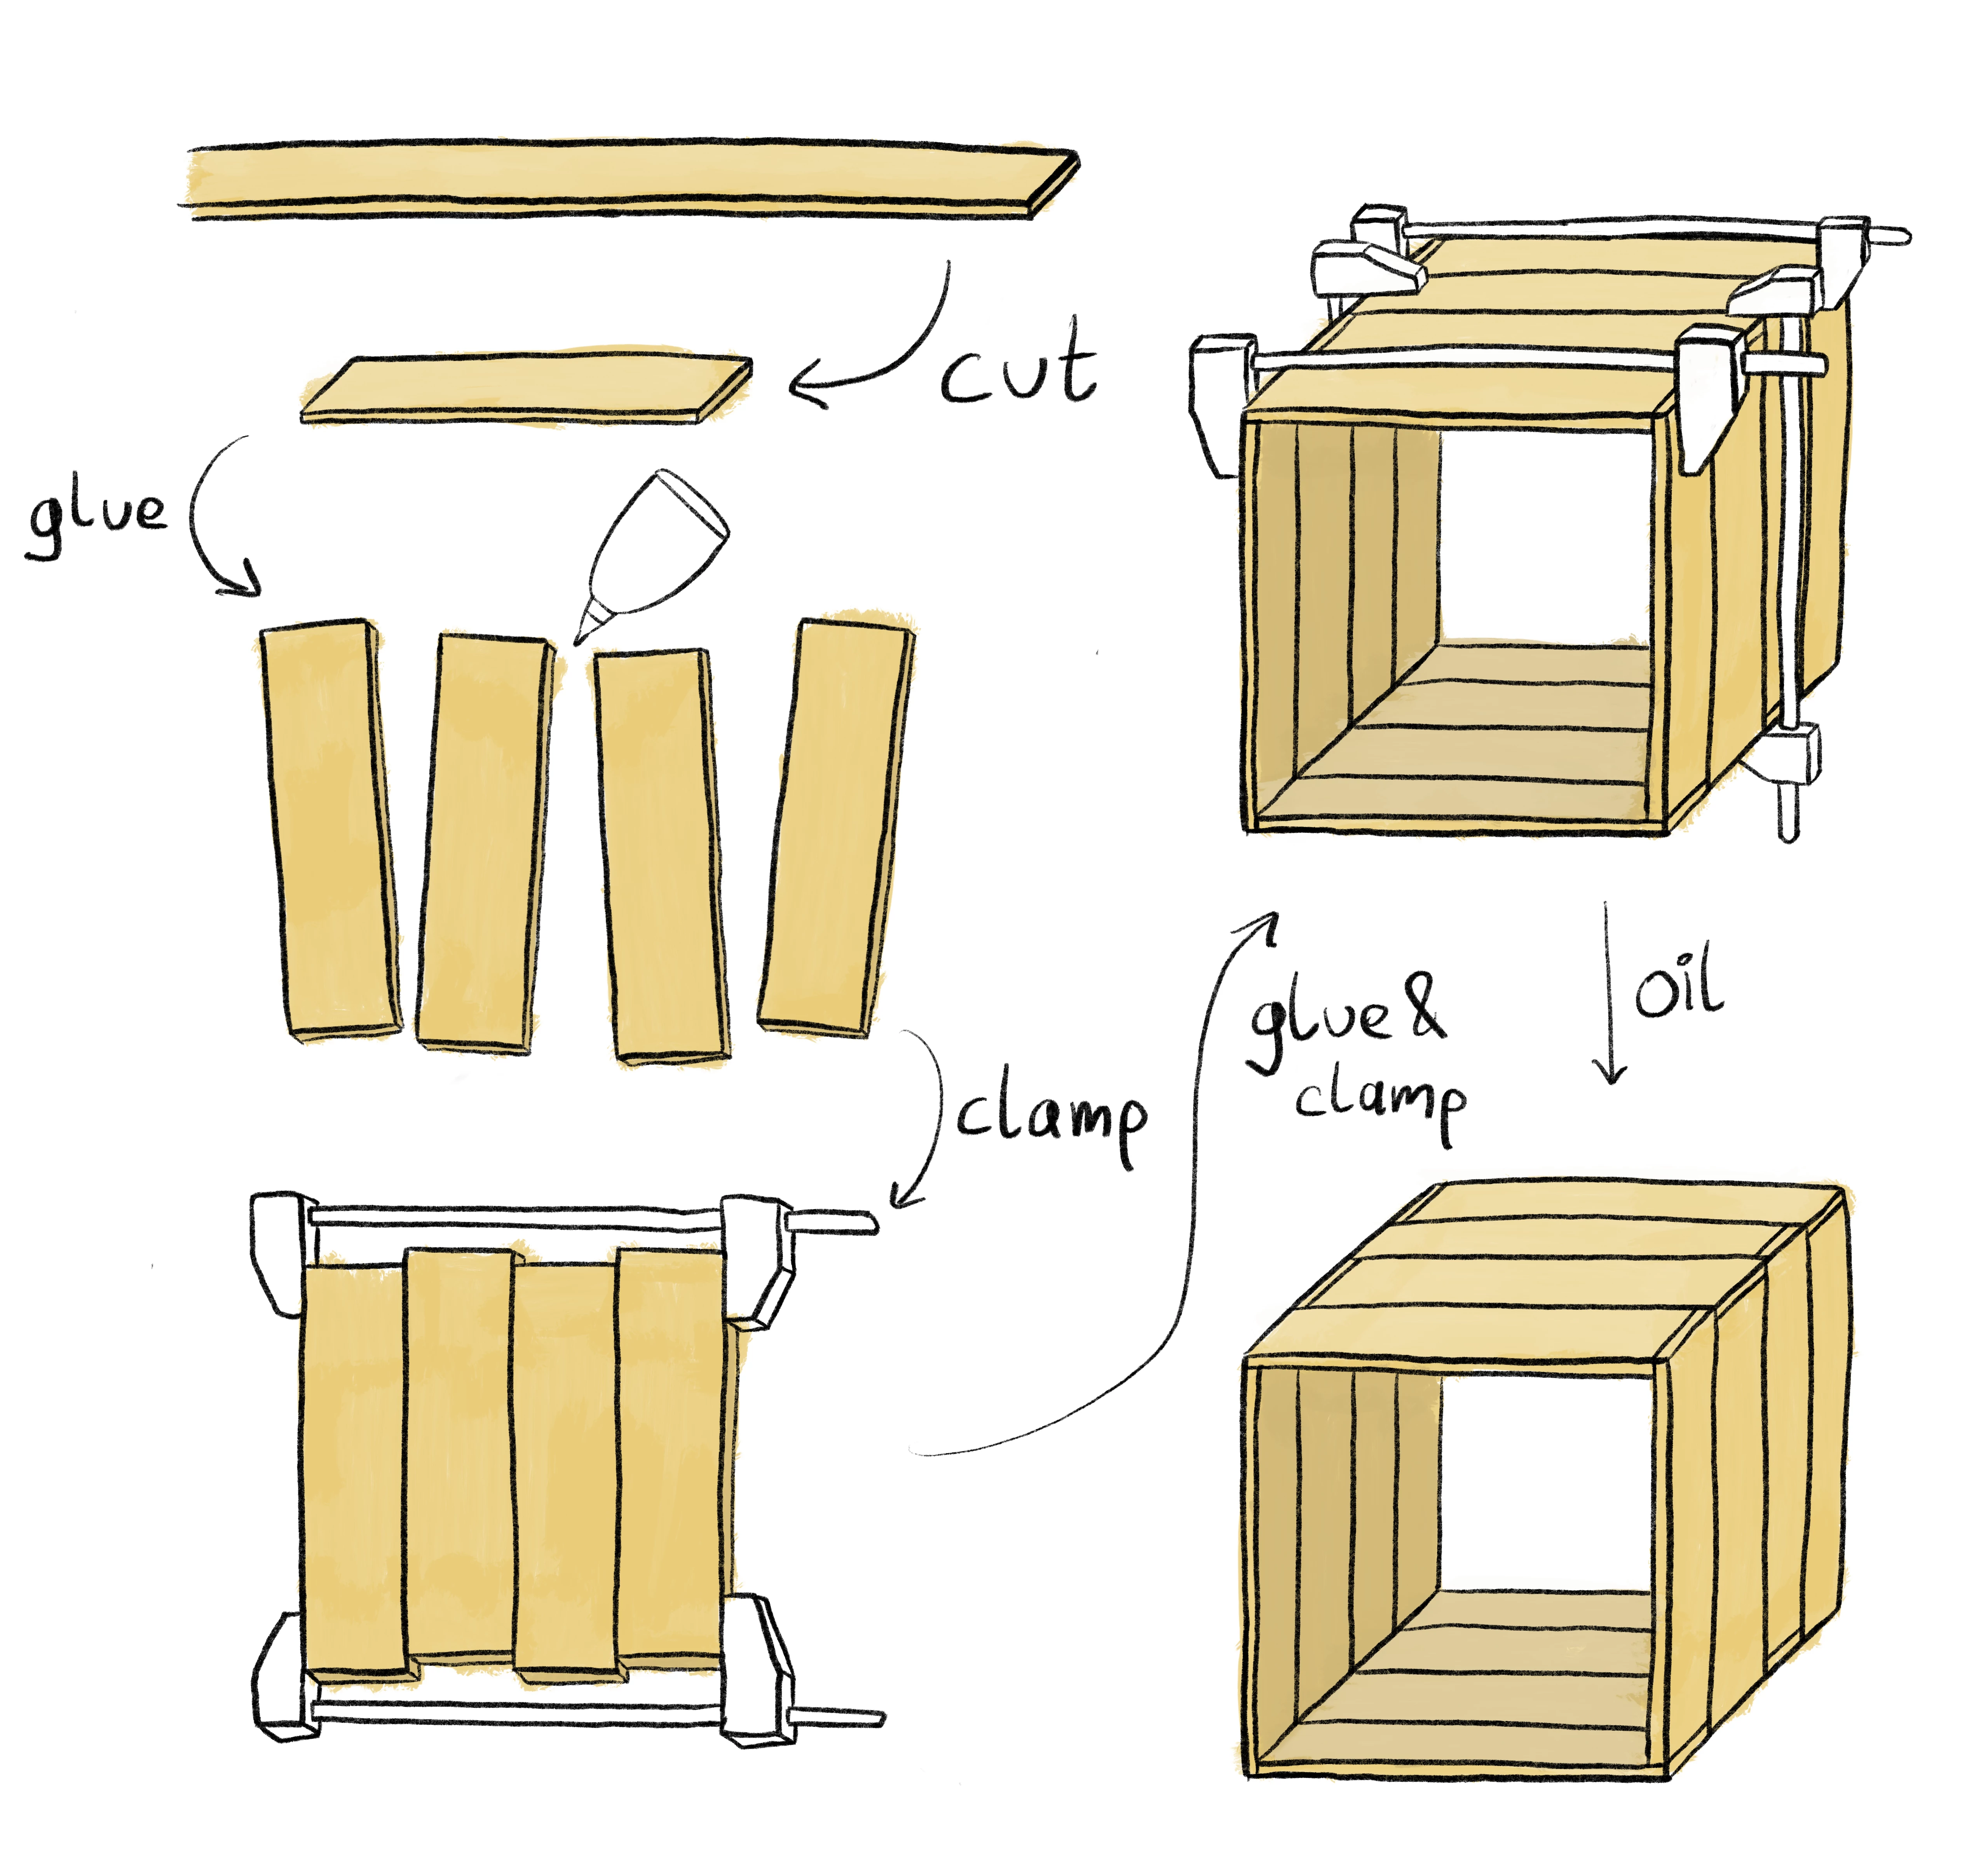 The process of making a box